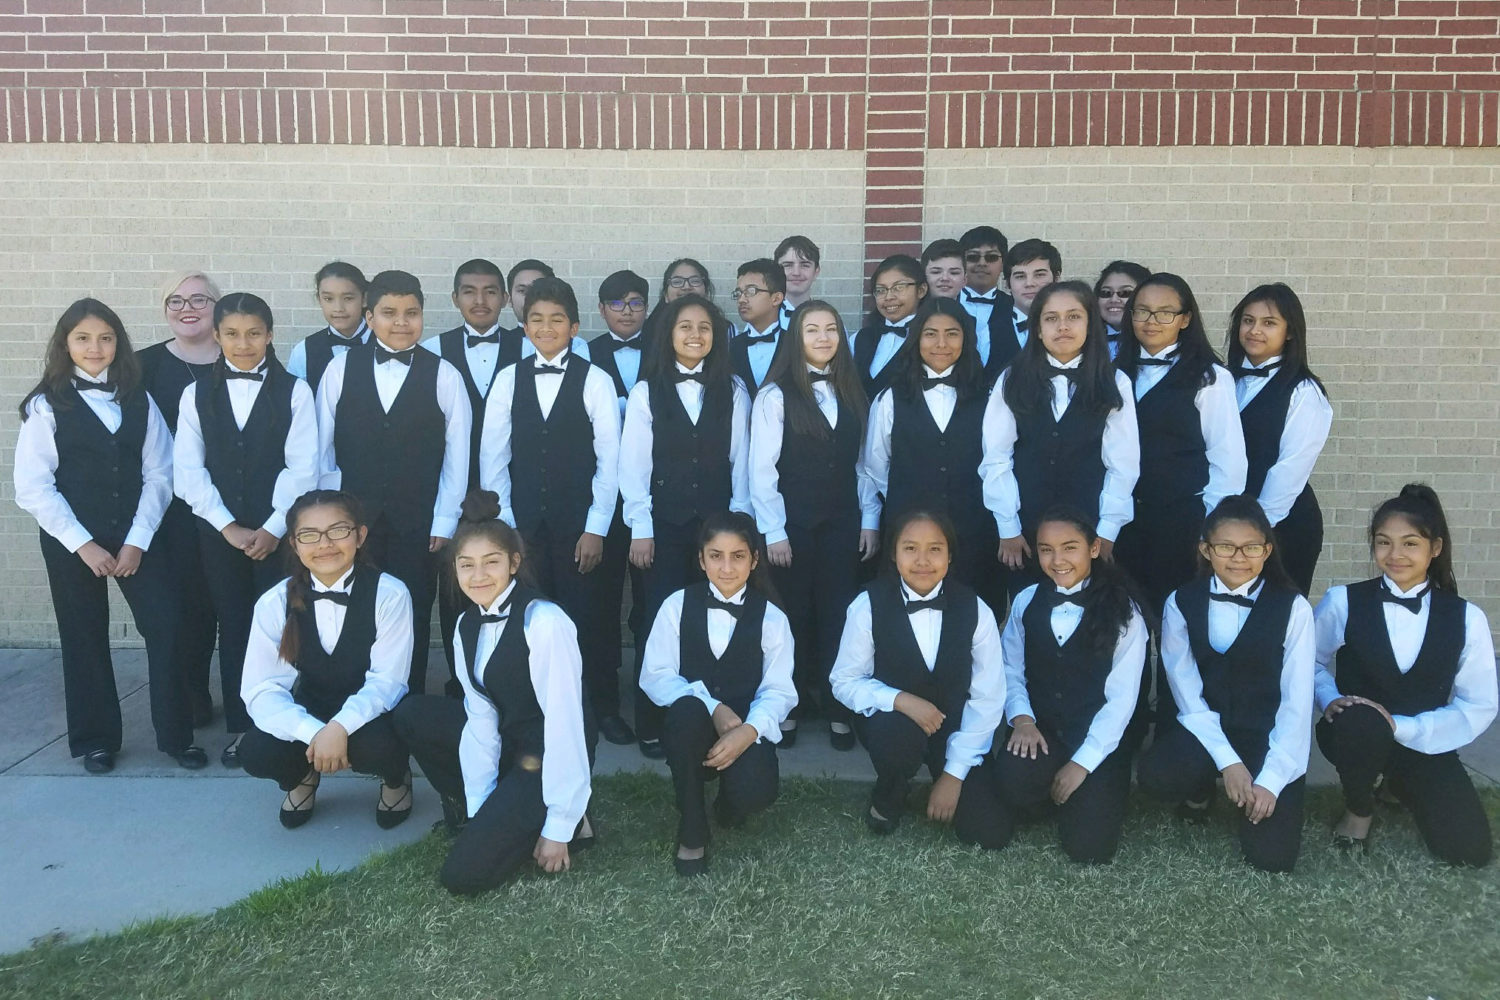 The Washington JH chamber and philharmonic orchestra students pose for a picture at their UIL contest.